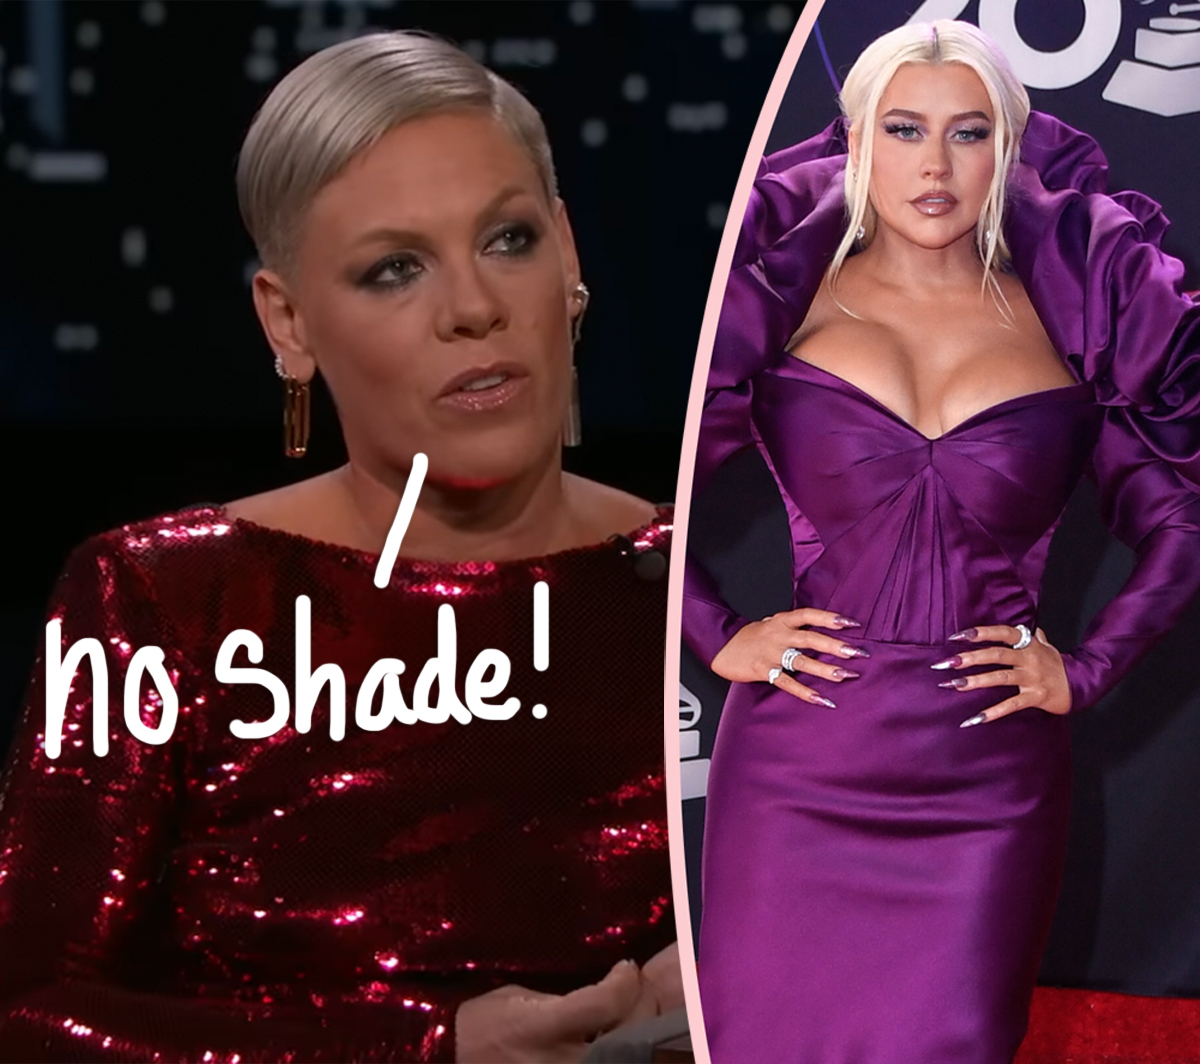 #Pink Denies ‘Shading’ Christina Aguilera With Lady Marmalade Video Comments!